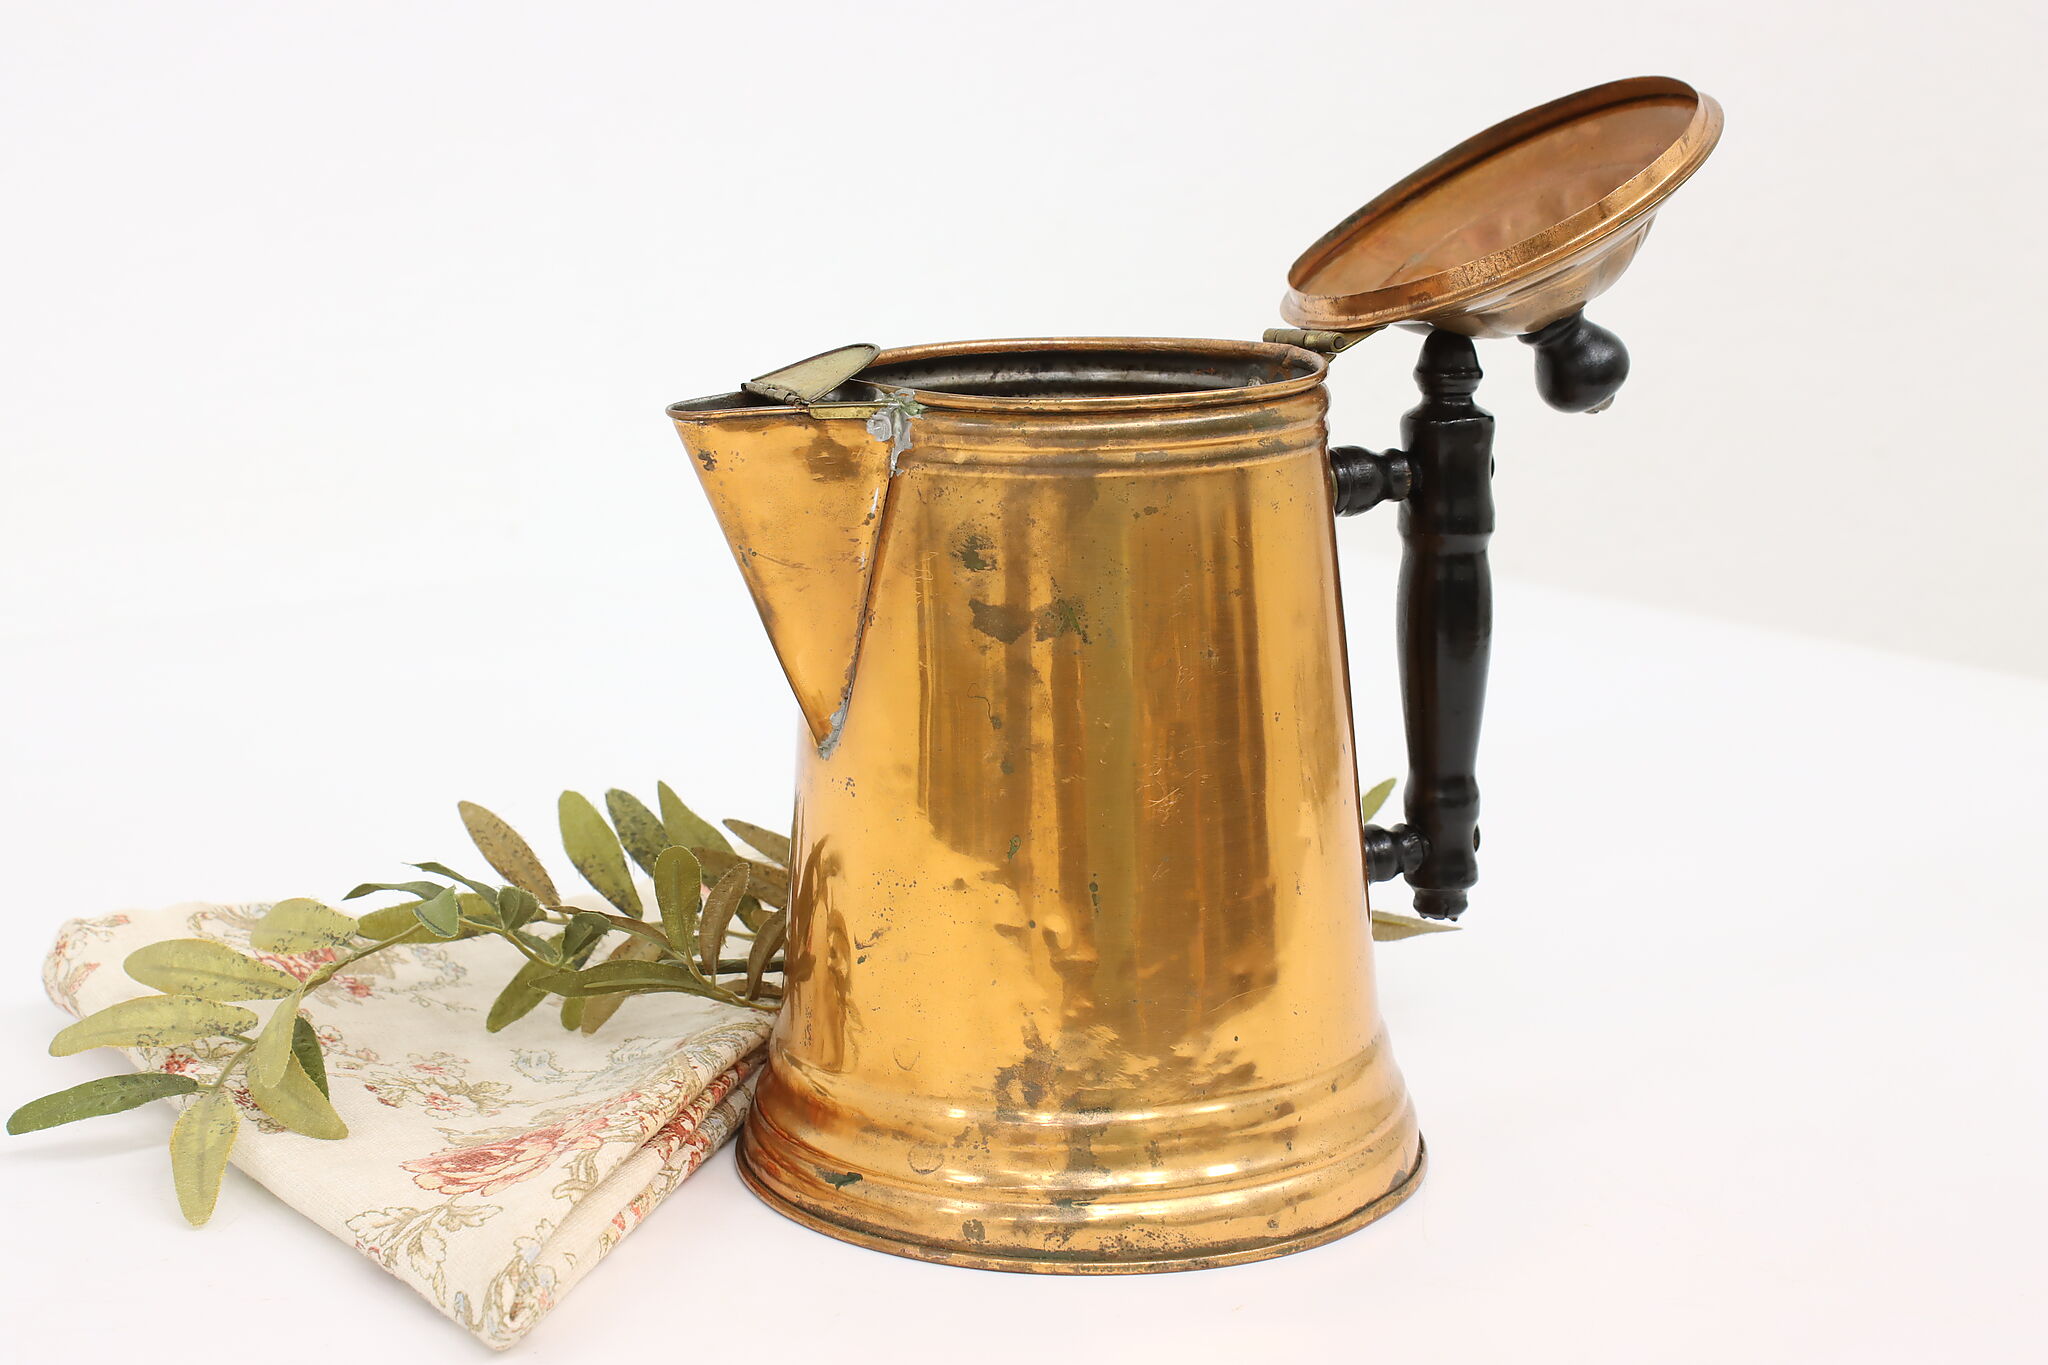 Vintage French Copper Coffee Set with Tray - Coffee Pot, Milk Jug